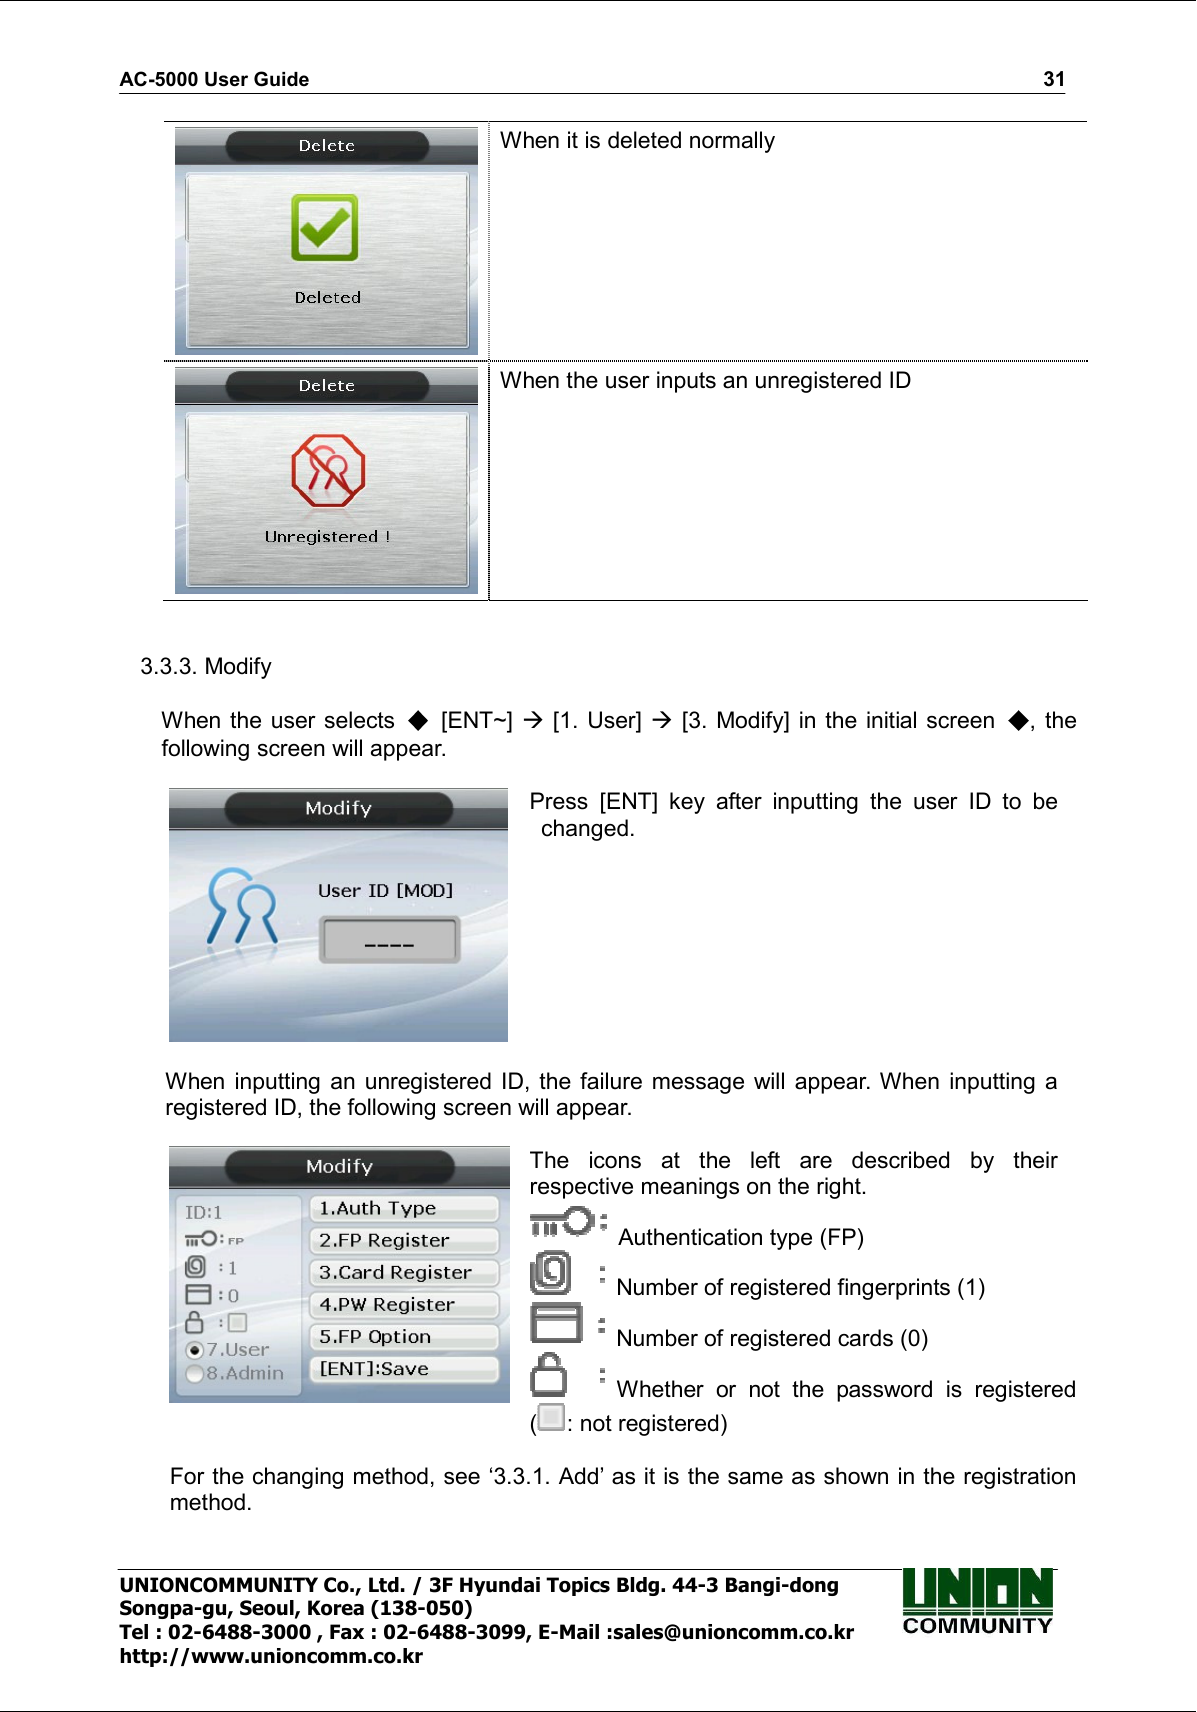 AC-5000 User Guide                                                                                                                                                   31 UNIONCOMMUNITY Co., Ltd. / 3F Hyundai Topics Bldg. 44-3 Bangi-dong Songpa-gu, Seoul, Korea (138-050) Tel : 02-6488-3000 , Fax : 02-6488-3099, E-Mail :sales@unioncomm.co.kr http://www.unioncomm.co.kr  When it is deleted normally  When the user inputs an unregistered ID   3.3.3. Modify  When the user selects    [ENT~]  [1. User]  [3. Modify] in the initial screen  , the following screen will appear.   Press  [ENT]  key  after  inputting  the  user  ID  to  be changed.    When inputting  an  unregistered ID, the  failure message  will  appear. When  inputting a registered ID, the following screen will appear.   The  icons  at  the  left  are  described  by  their respective meanings on the right.   Authentication type (FP)   Number of registered fingerprints (1)   Number of registered cards (0)   Whether  or  not  the  password  is  registered ( : not registered)  For the changing method, see ‘3.3.1. Add’ as it is the same as shown in the registration method. 